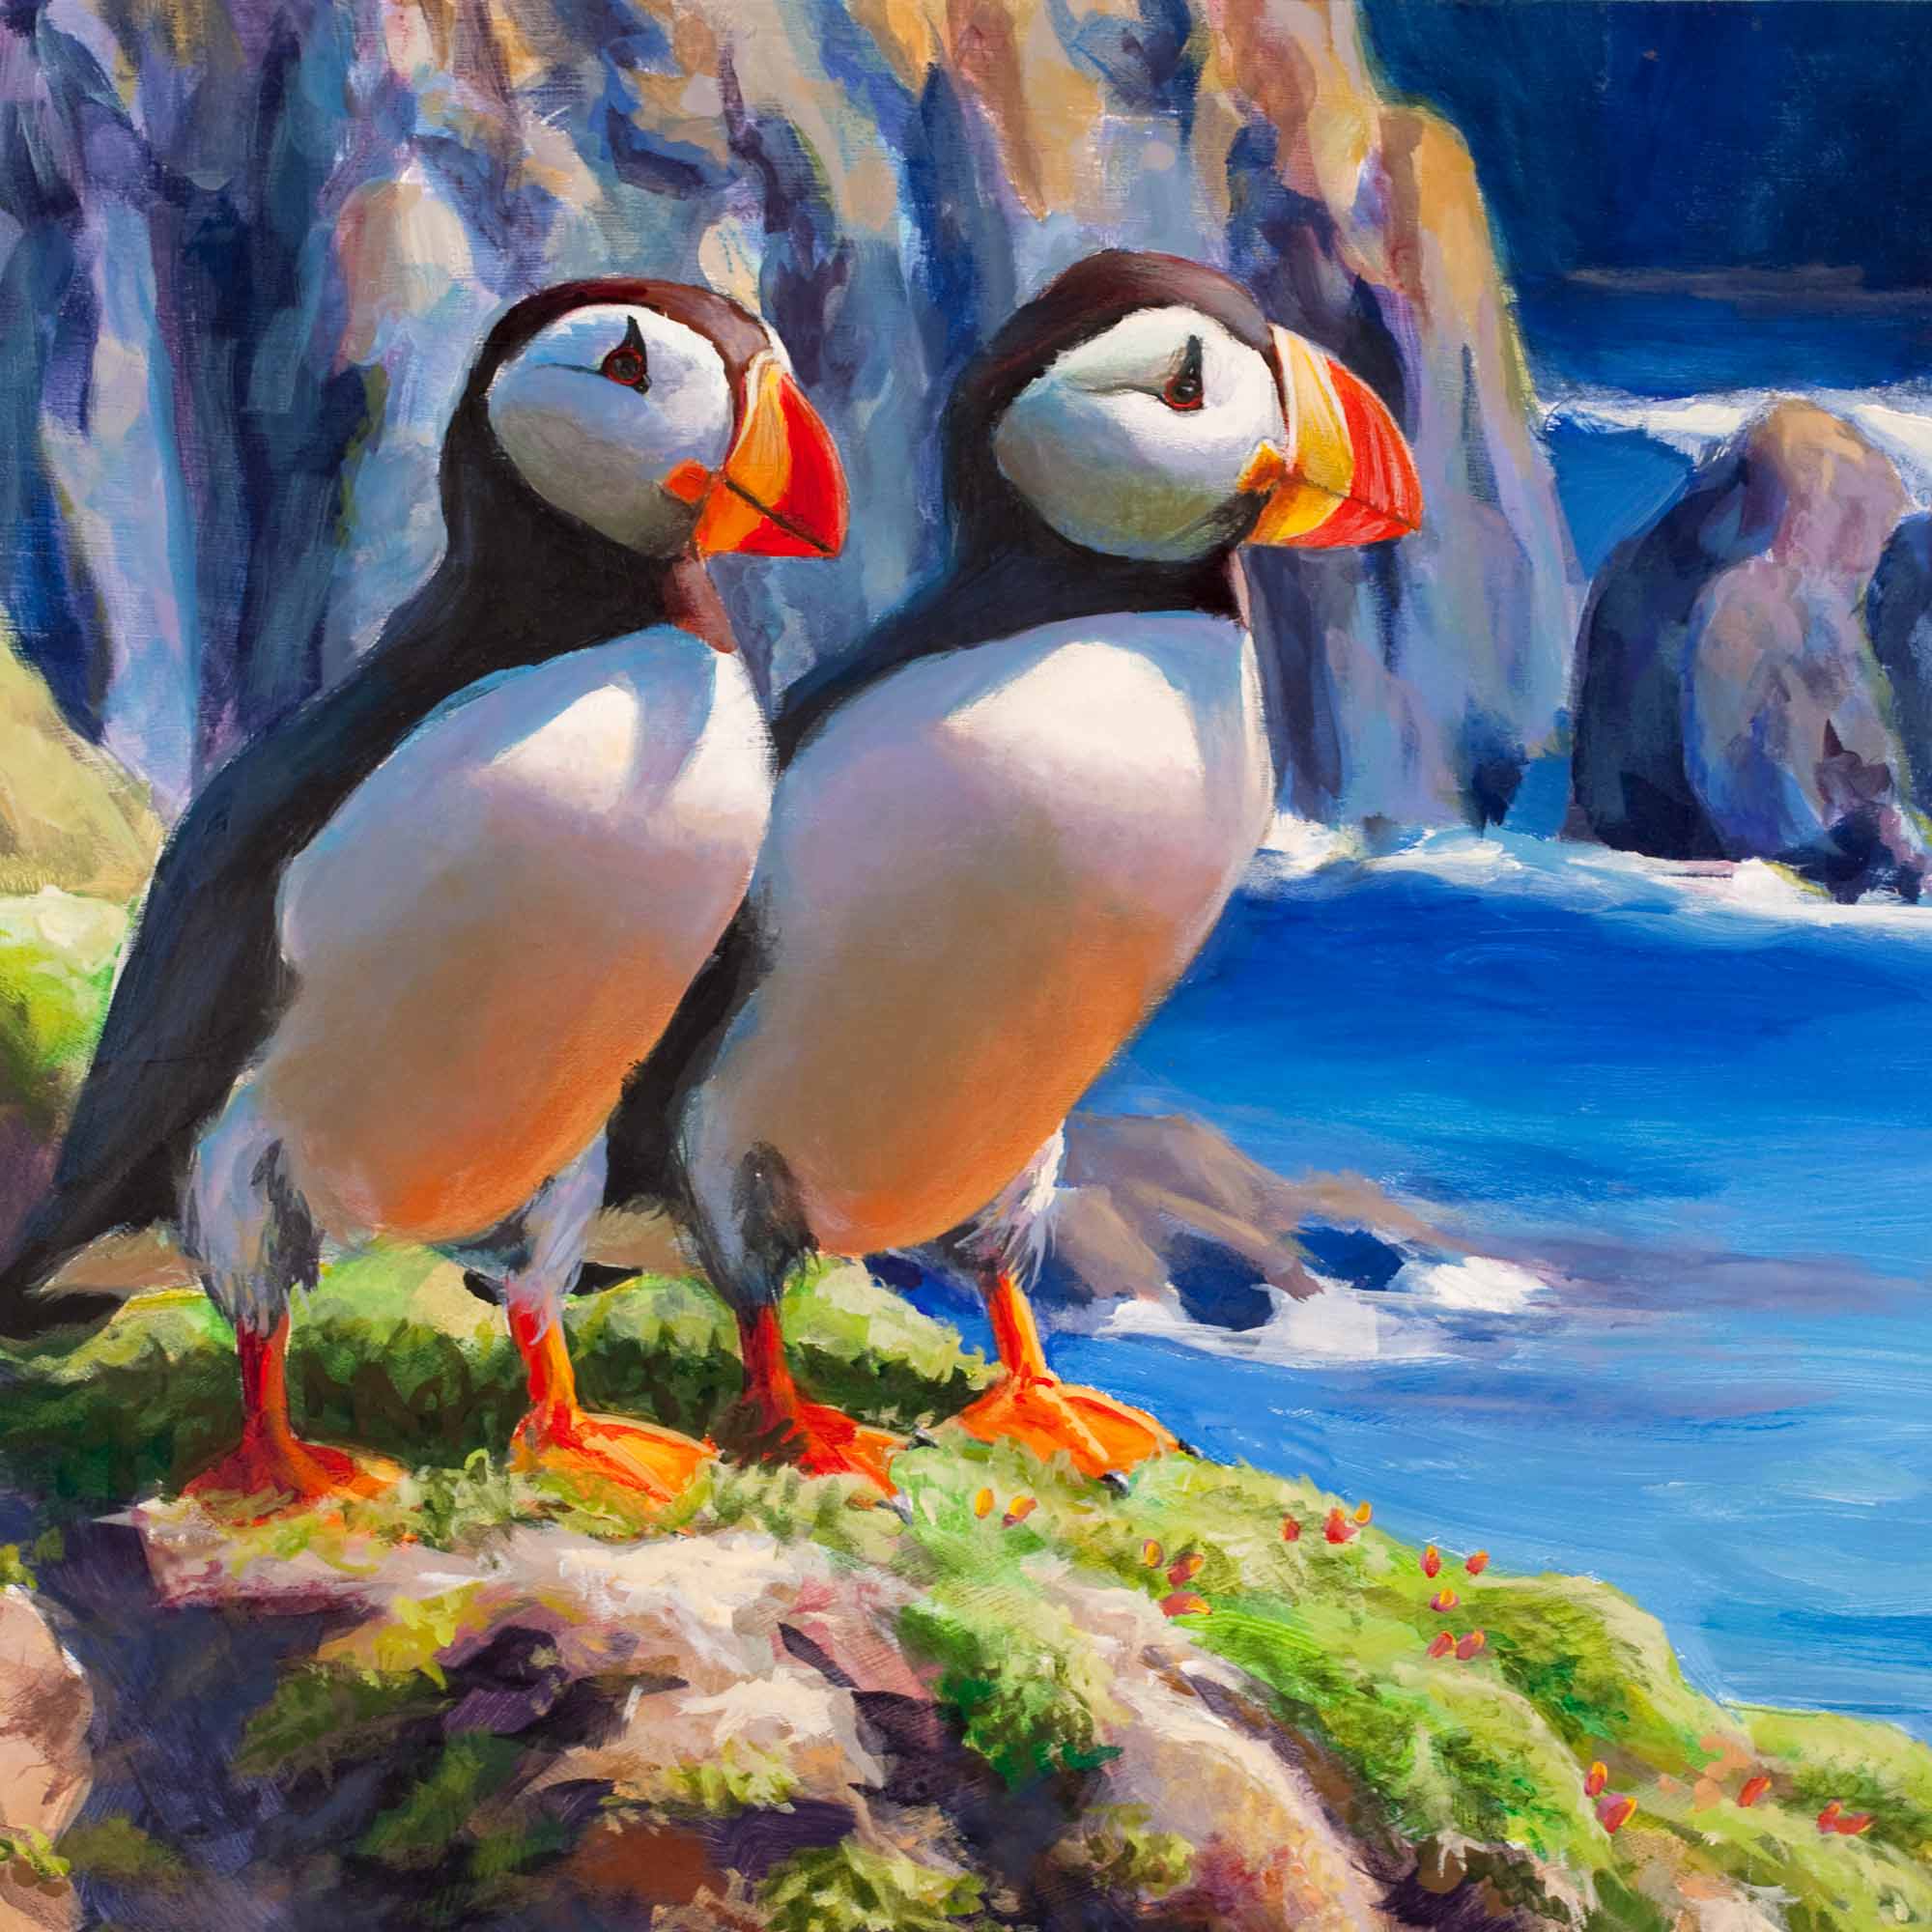 Painting of puffins in an Alaskan wall art print with coastal landscape artwork by artist Karen Whitworth